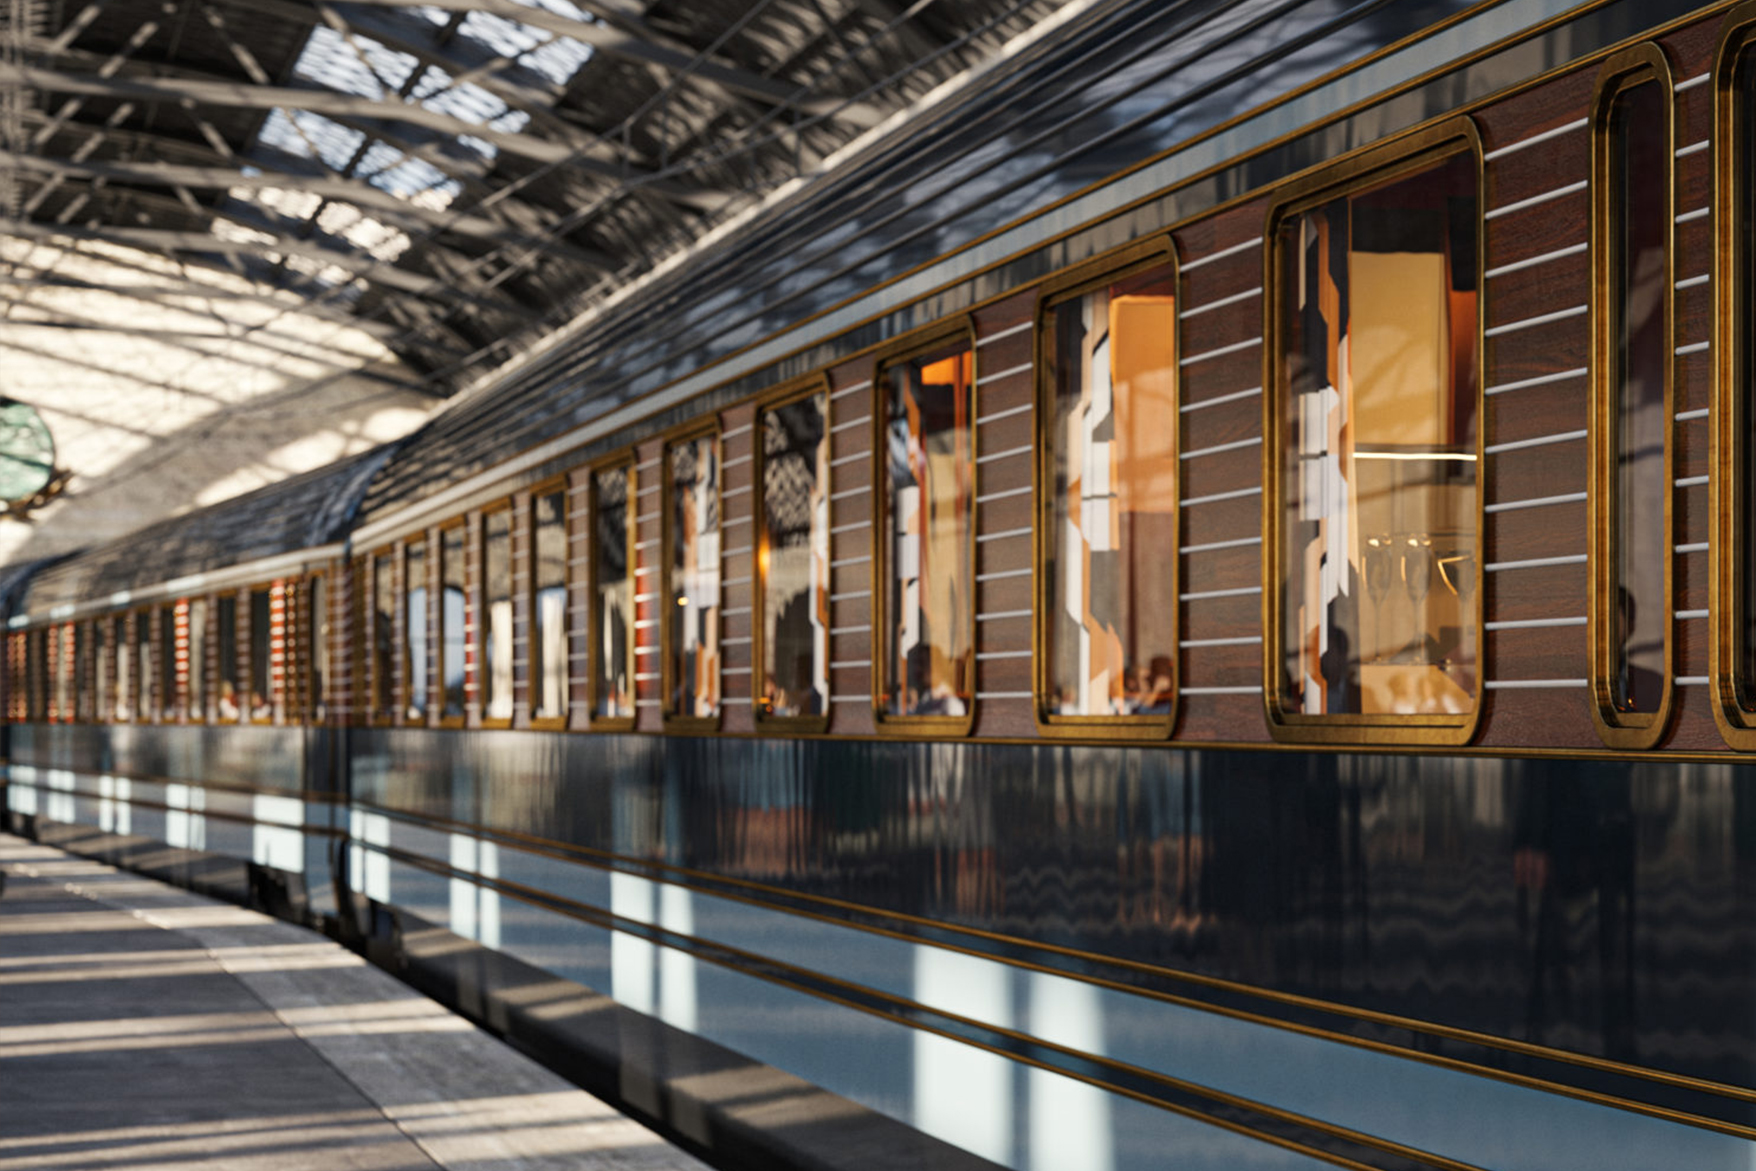 Let the last stop of the Orient Express be your home!